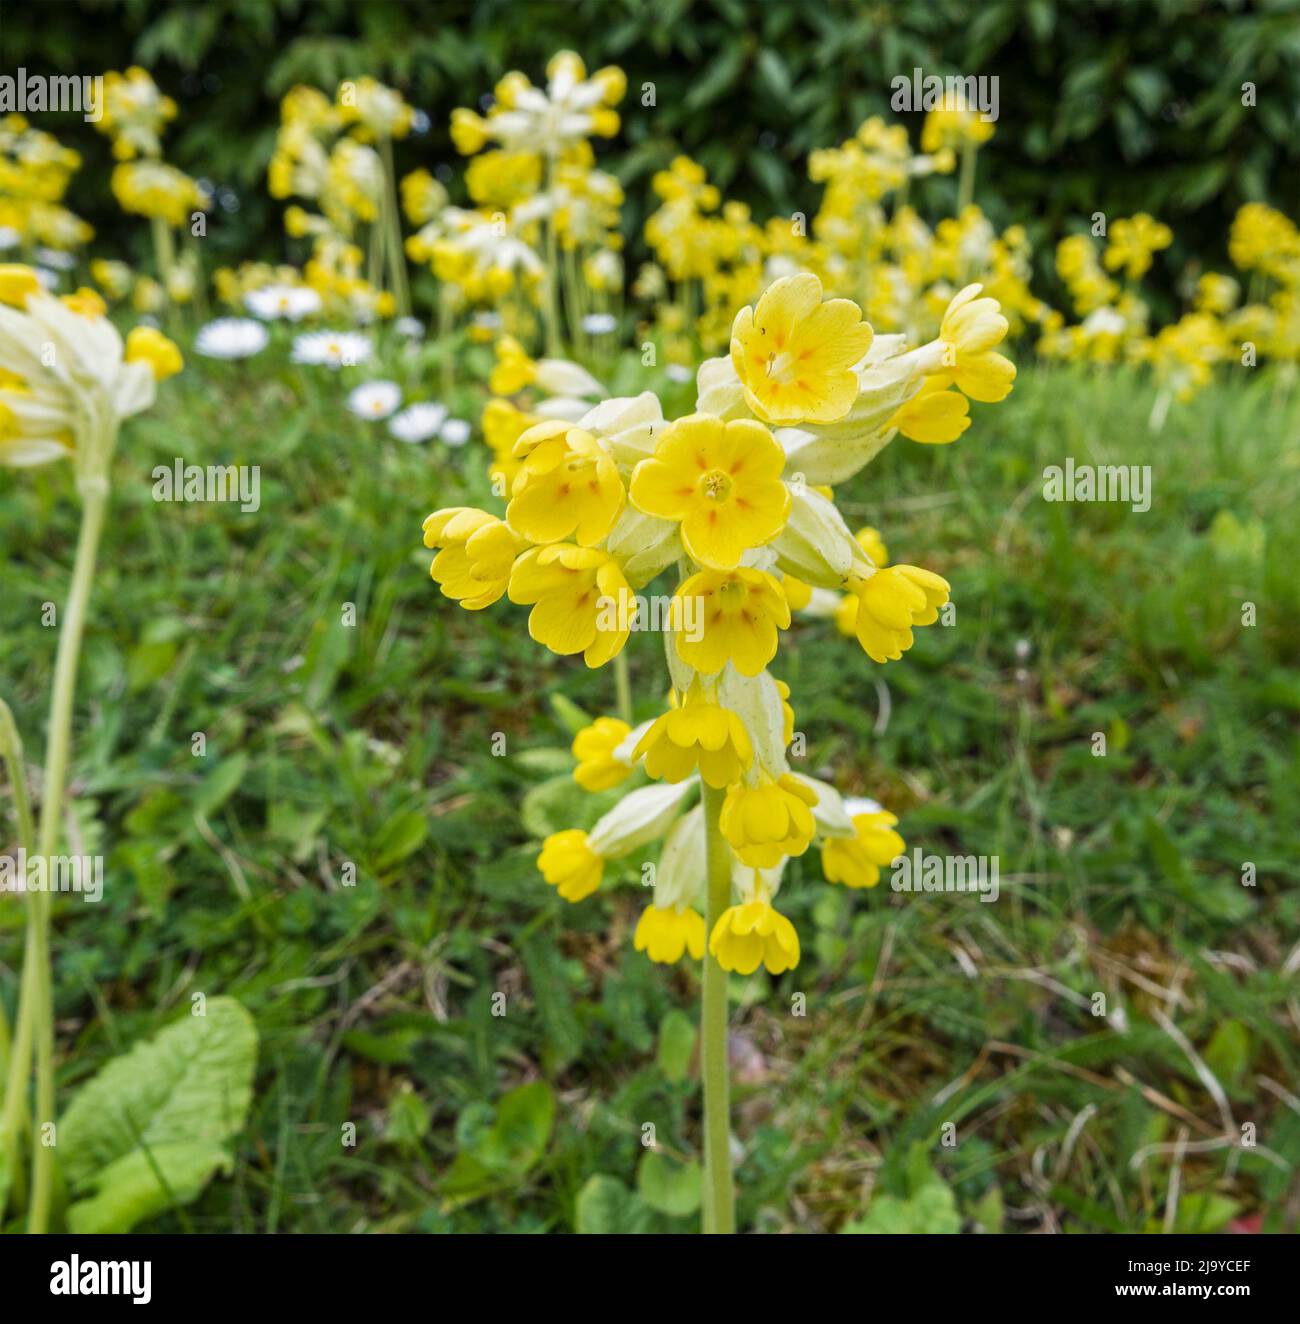 Yellow flowers of the Cowslip plant, Primula veris Stock Photo